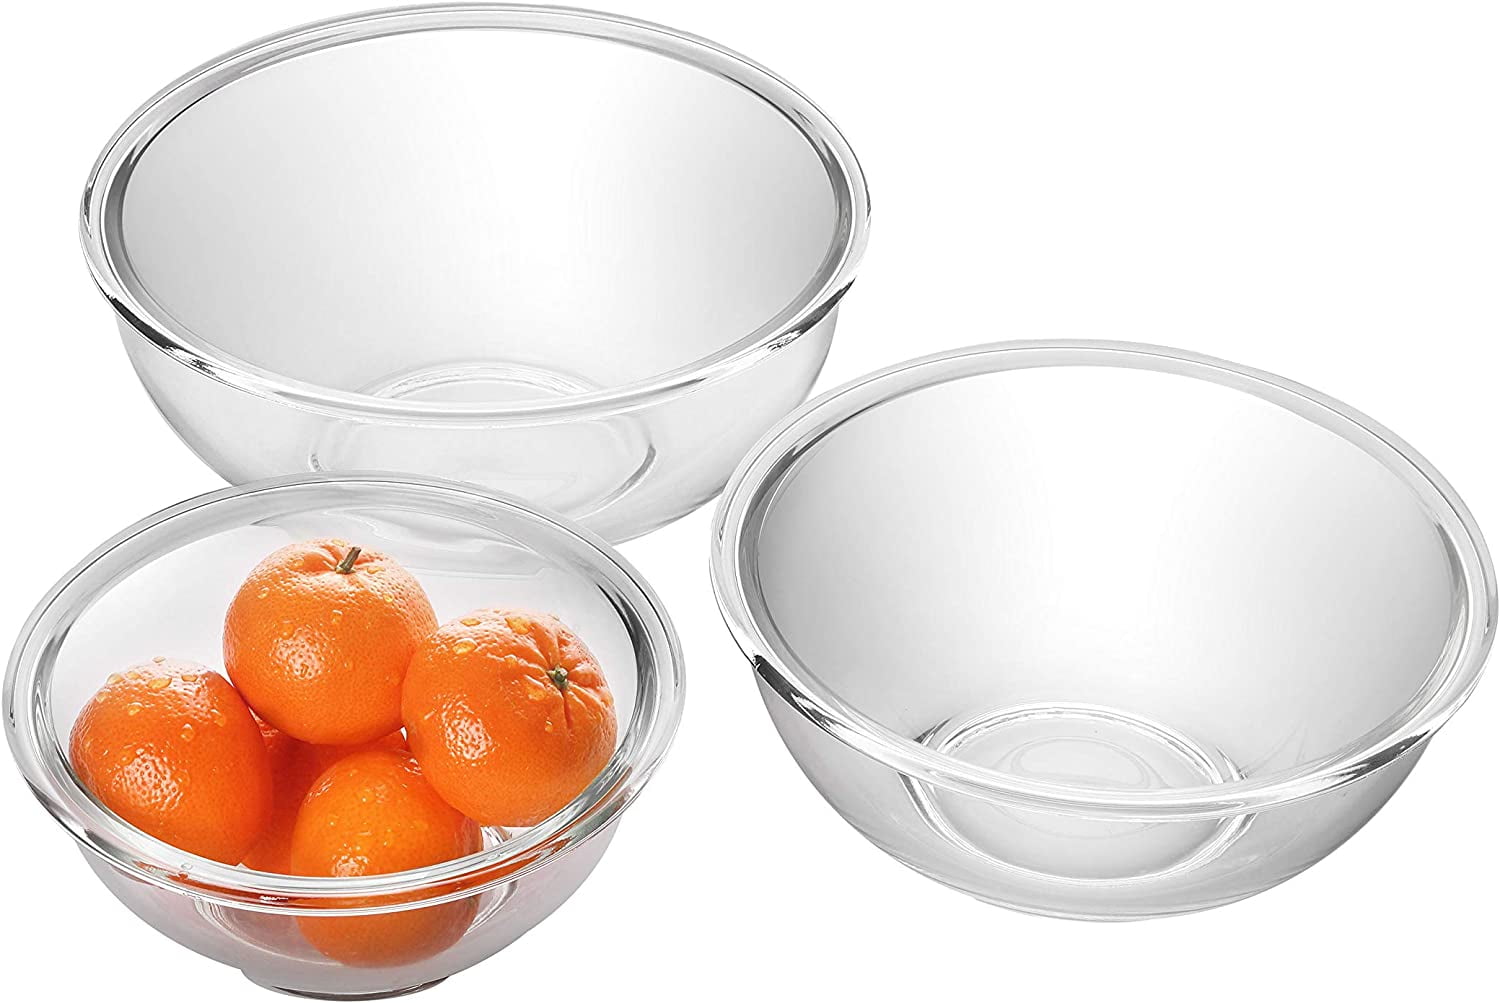 Bovado USA Glass Bowl for Storage, Mixing, Serving - Clear, Dishwasher, Freezer & Oven Safe Glass, Easy-Clean, 4 qt